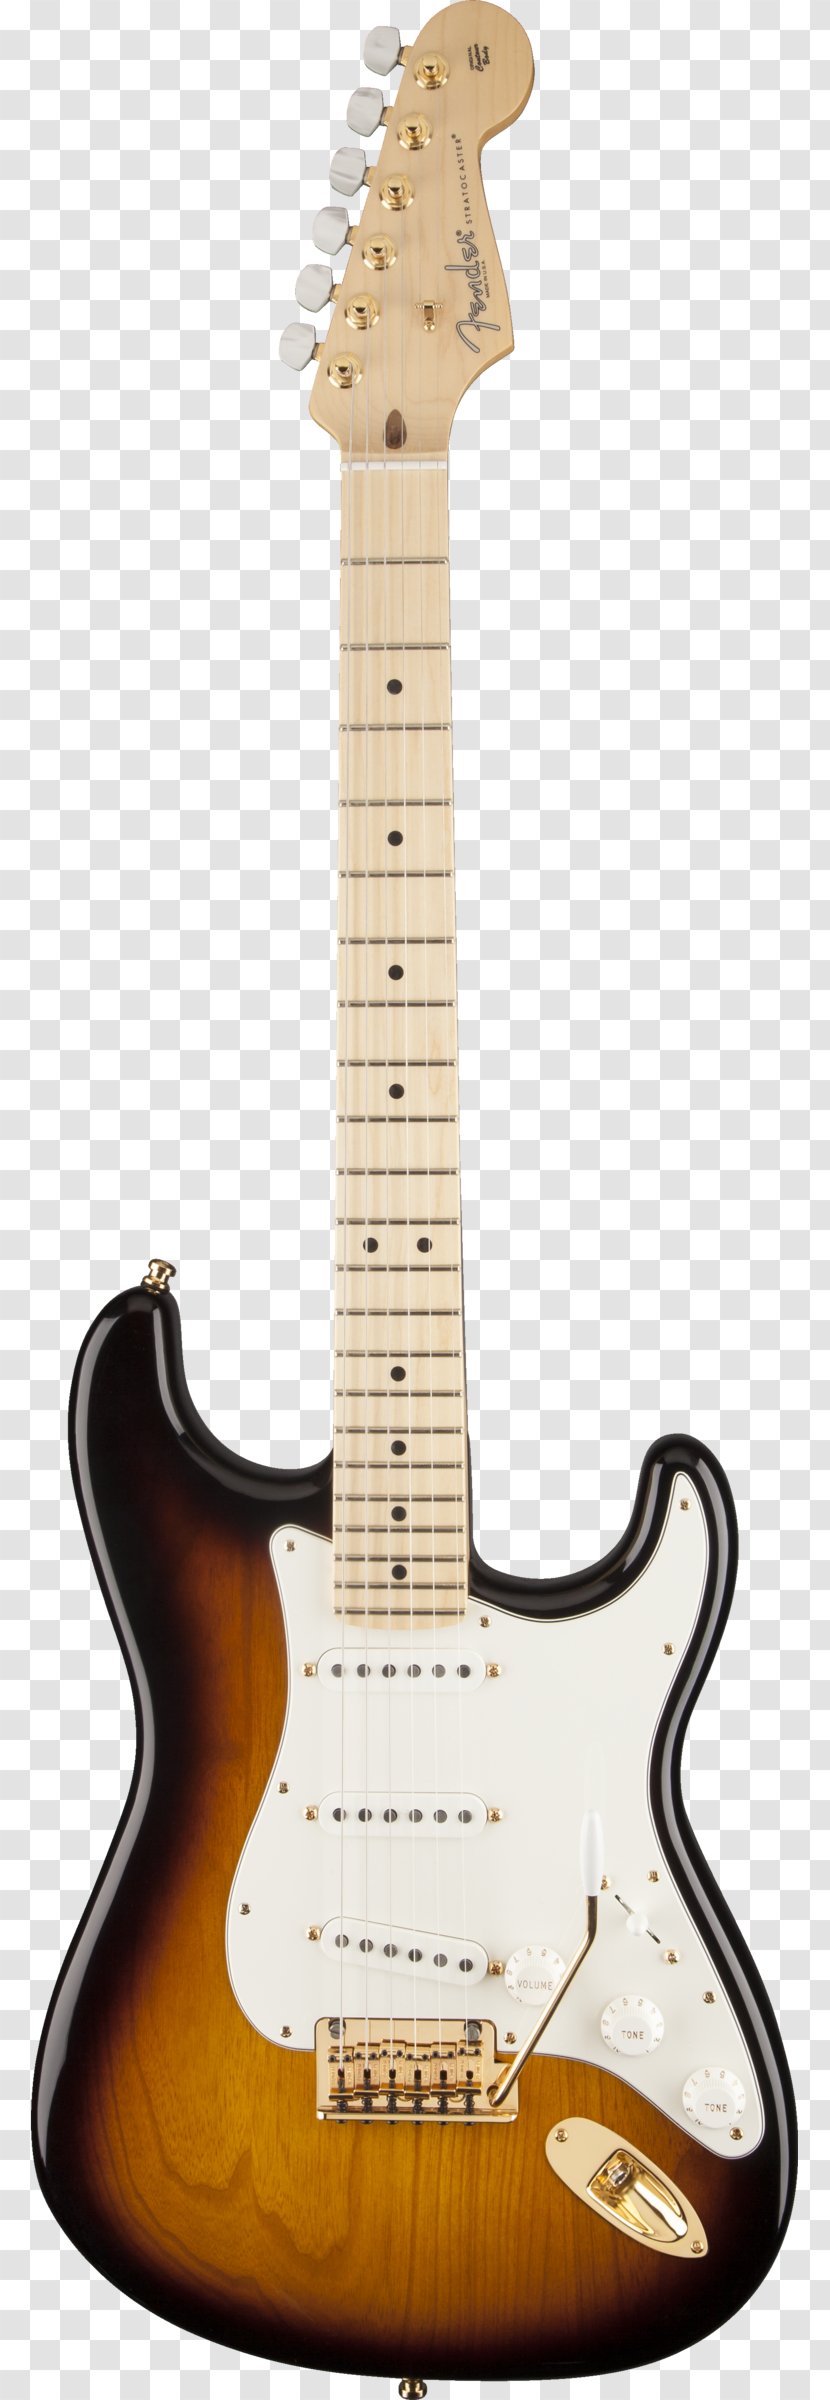 Fender Stratocaster Musical Instruments Corporation Electric Guitar American Deluxe Series Elite - Slide - 60th Anniversary Transparent PNG